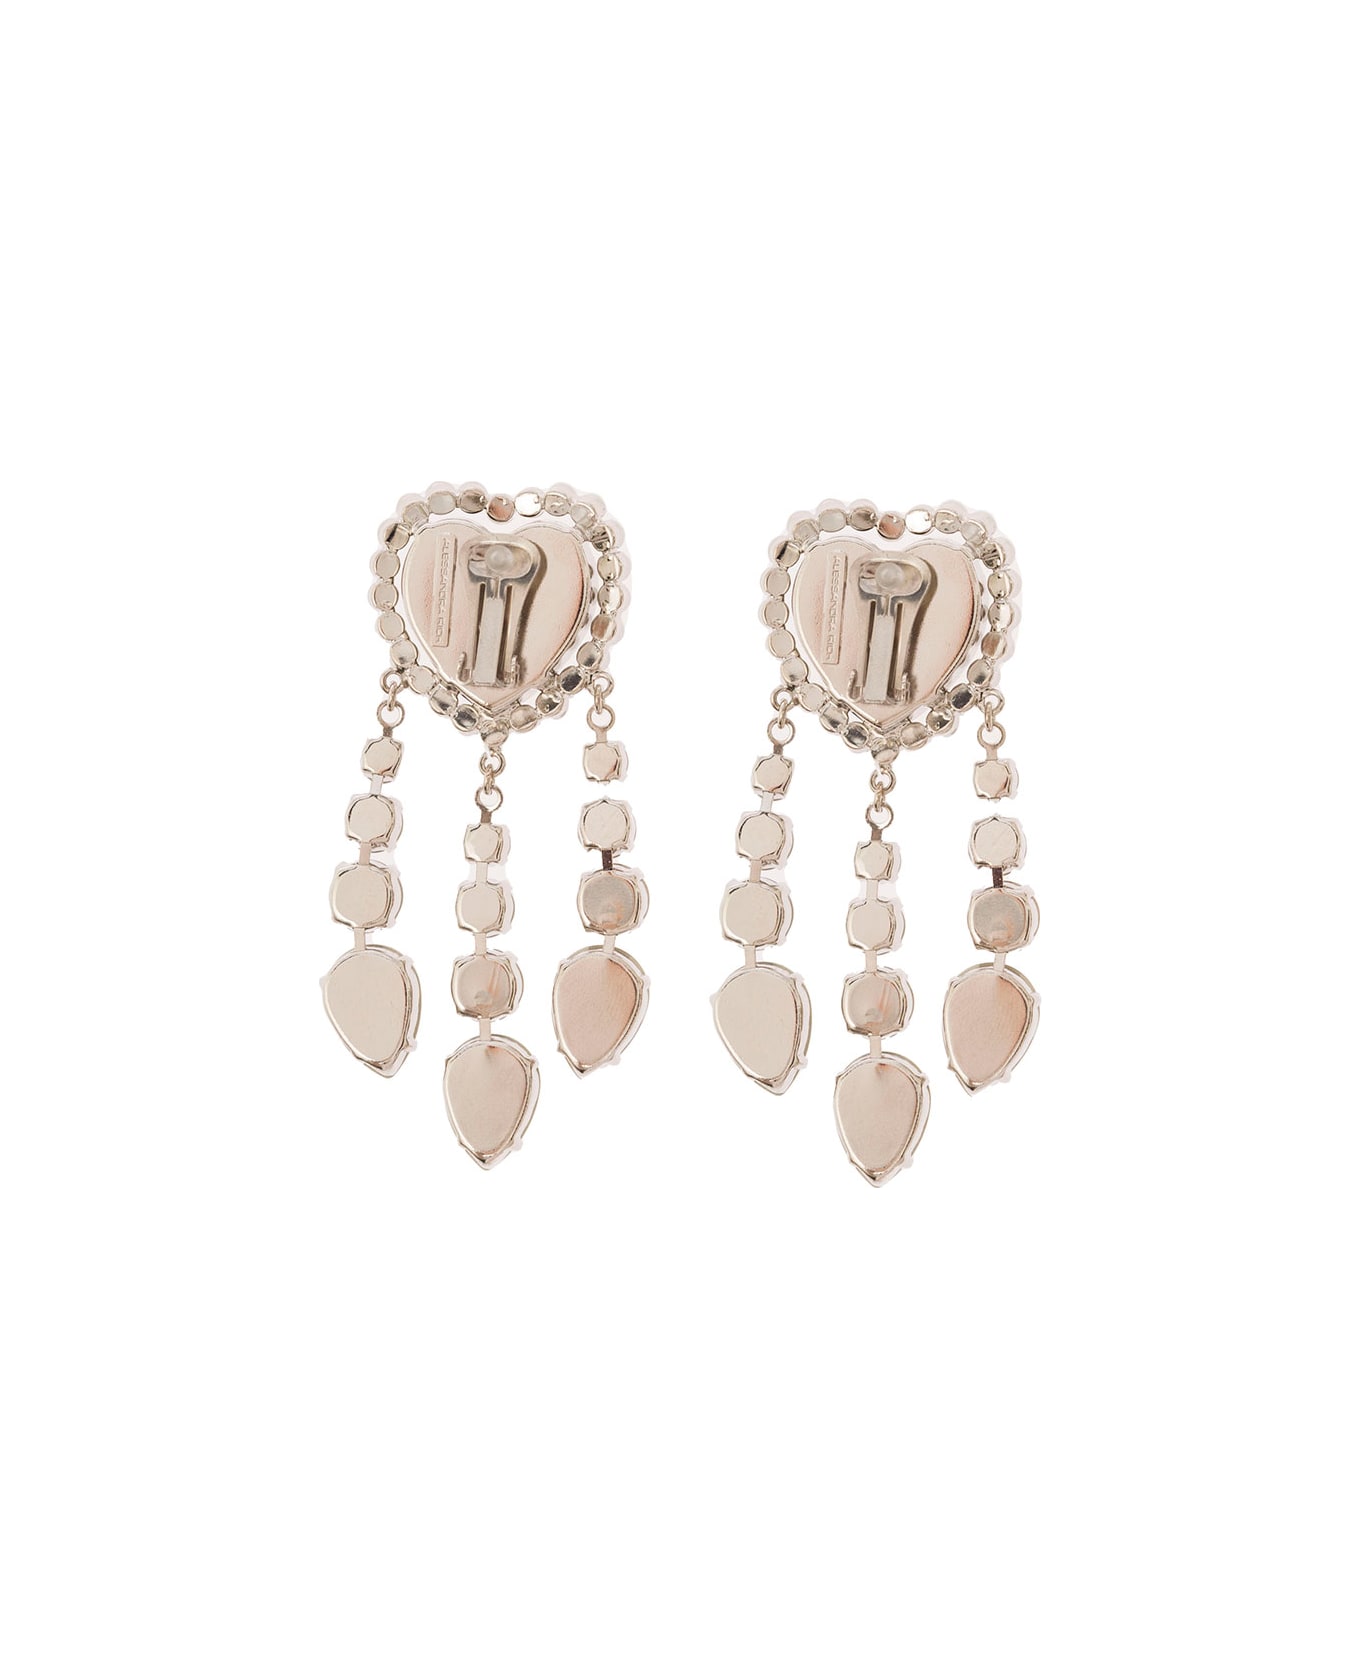 Alessandra Rich Silver-colored Heart-shaped Clip-on Earrings With Crystal Pendants In Hypoallergenic Brass Woman - Metallic